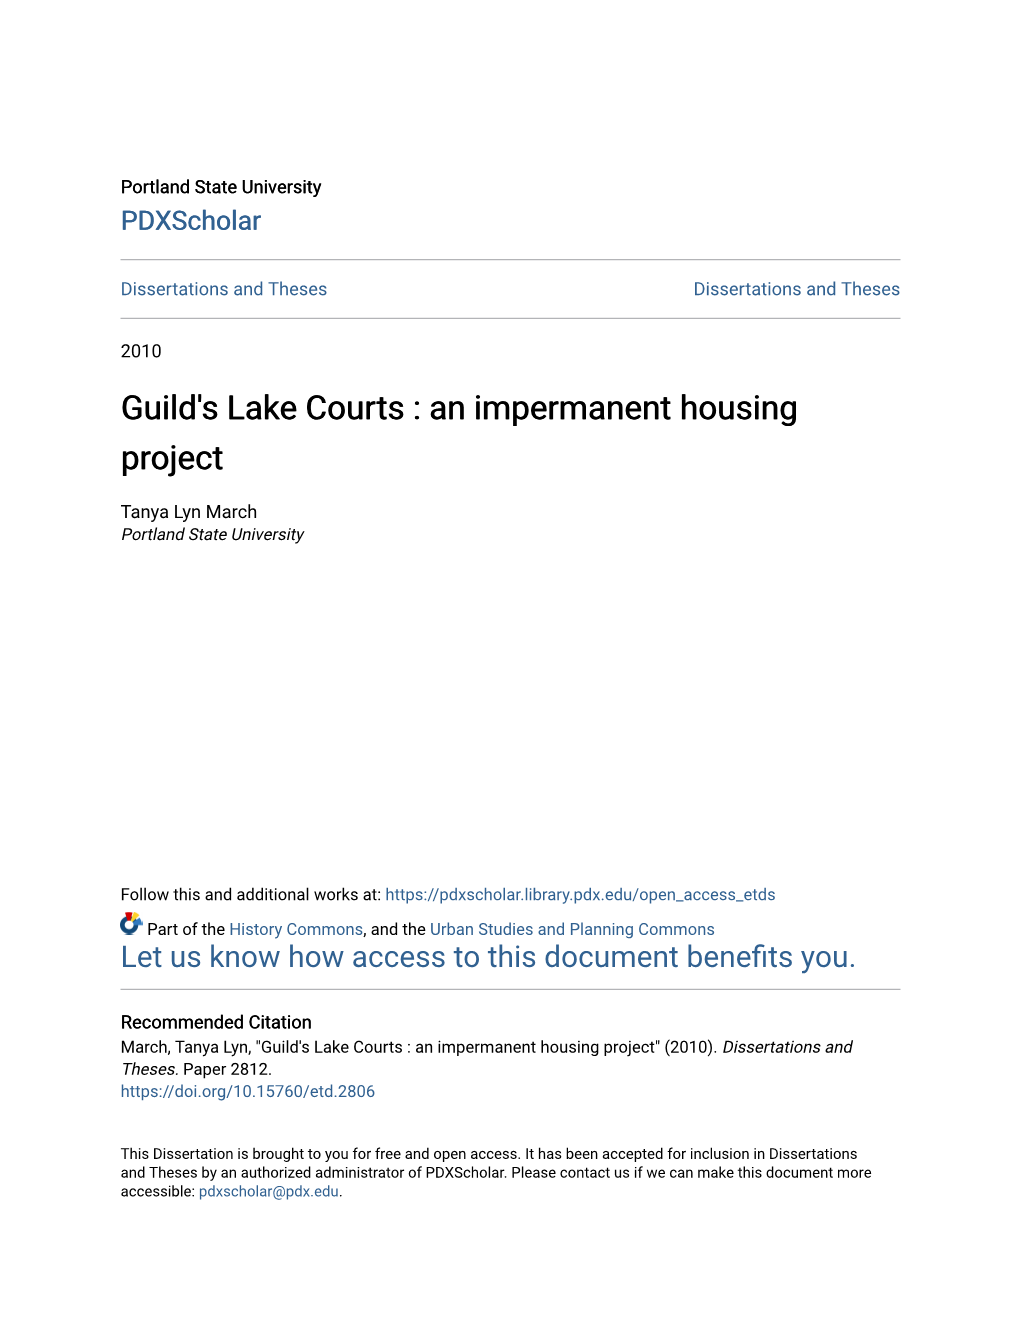 Guild's Lake Courts : an Impermanent Housing Project